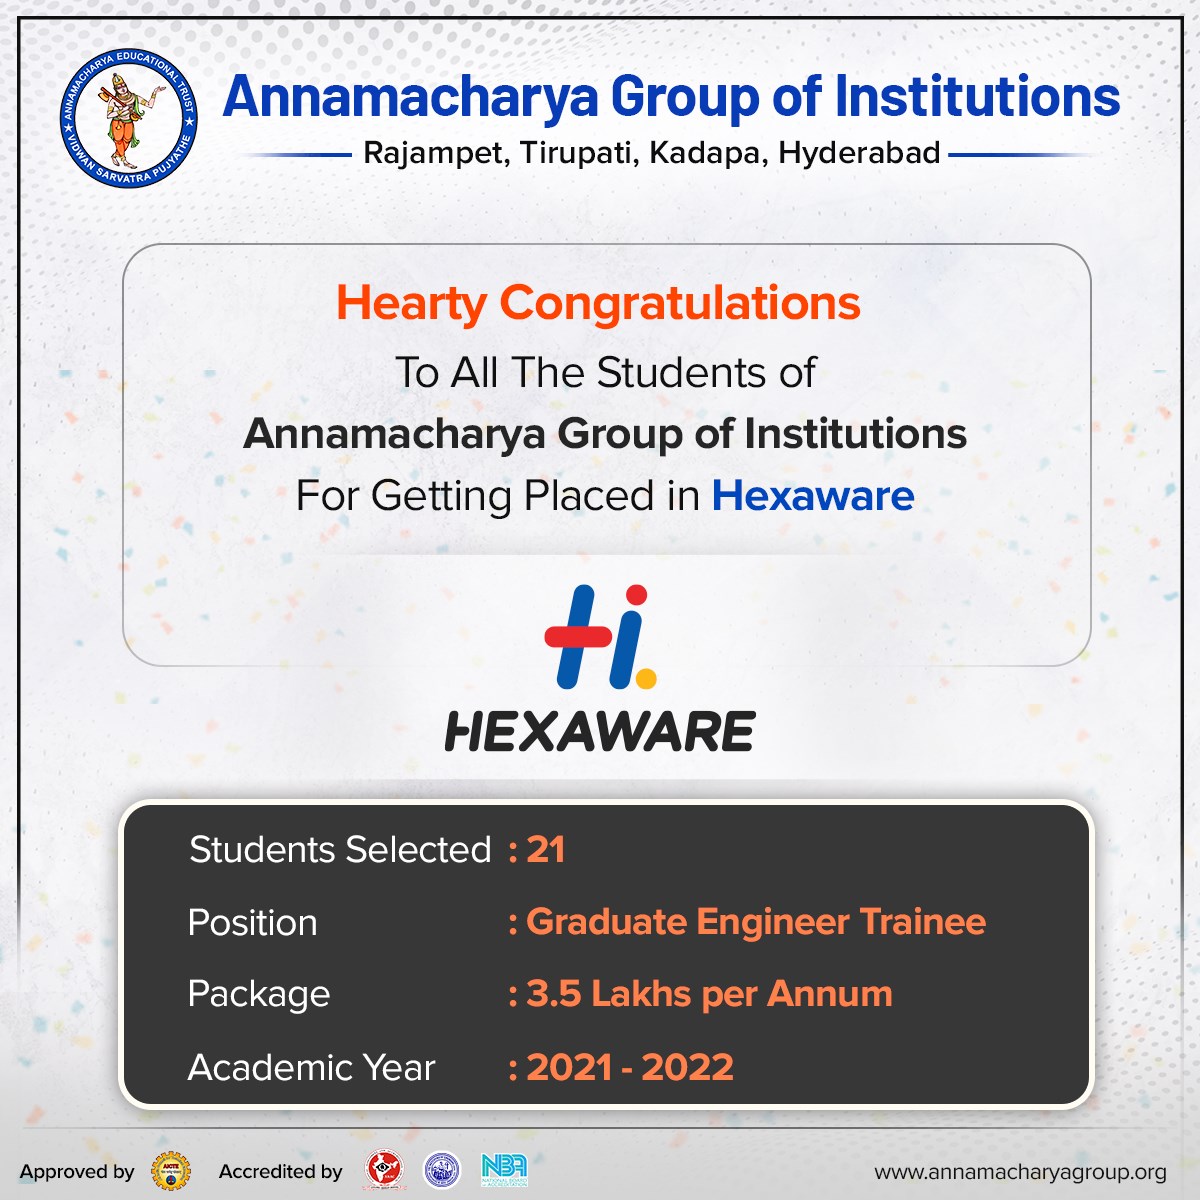  21 students are getting placed in Hexaware  